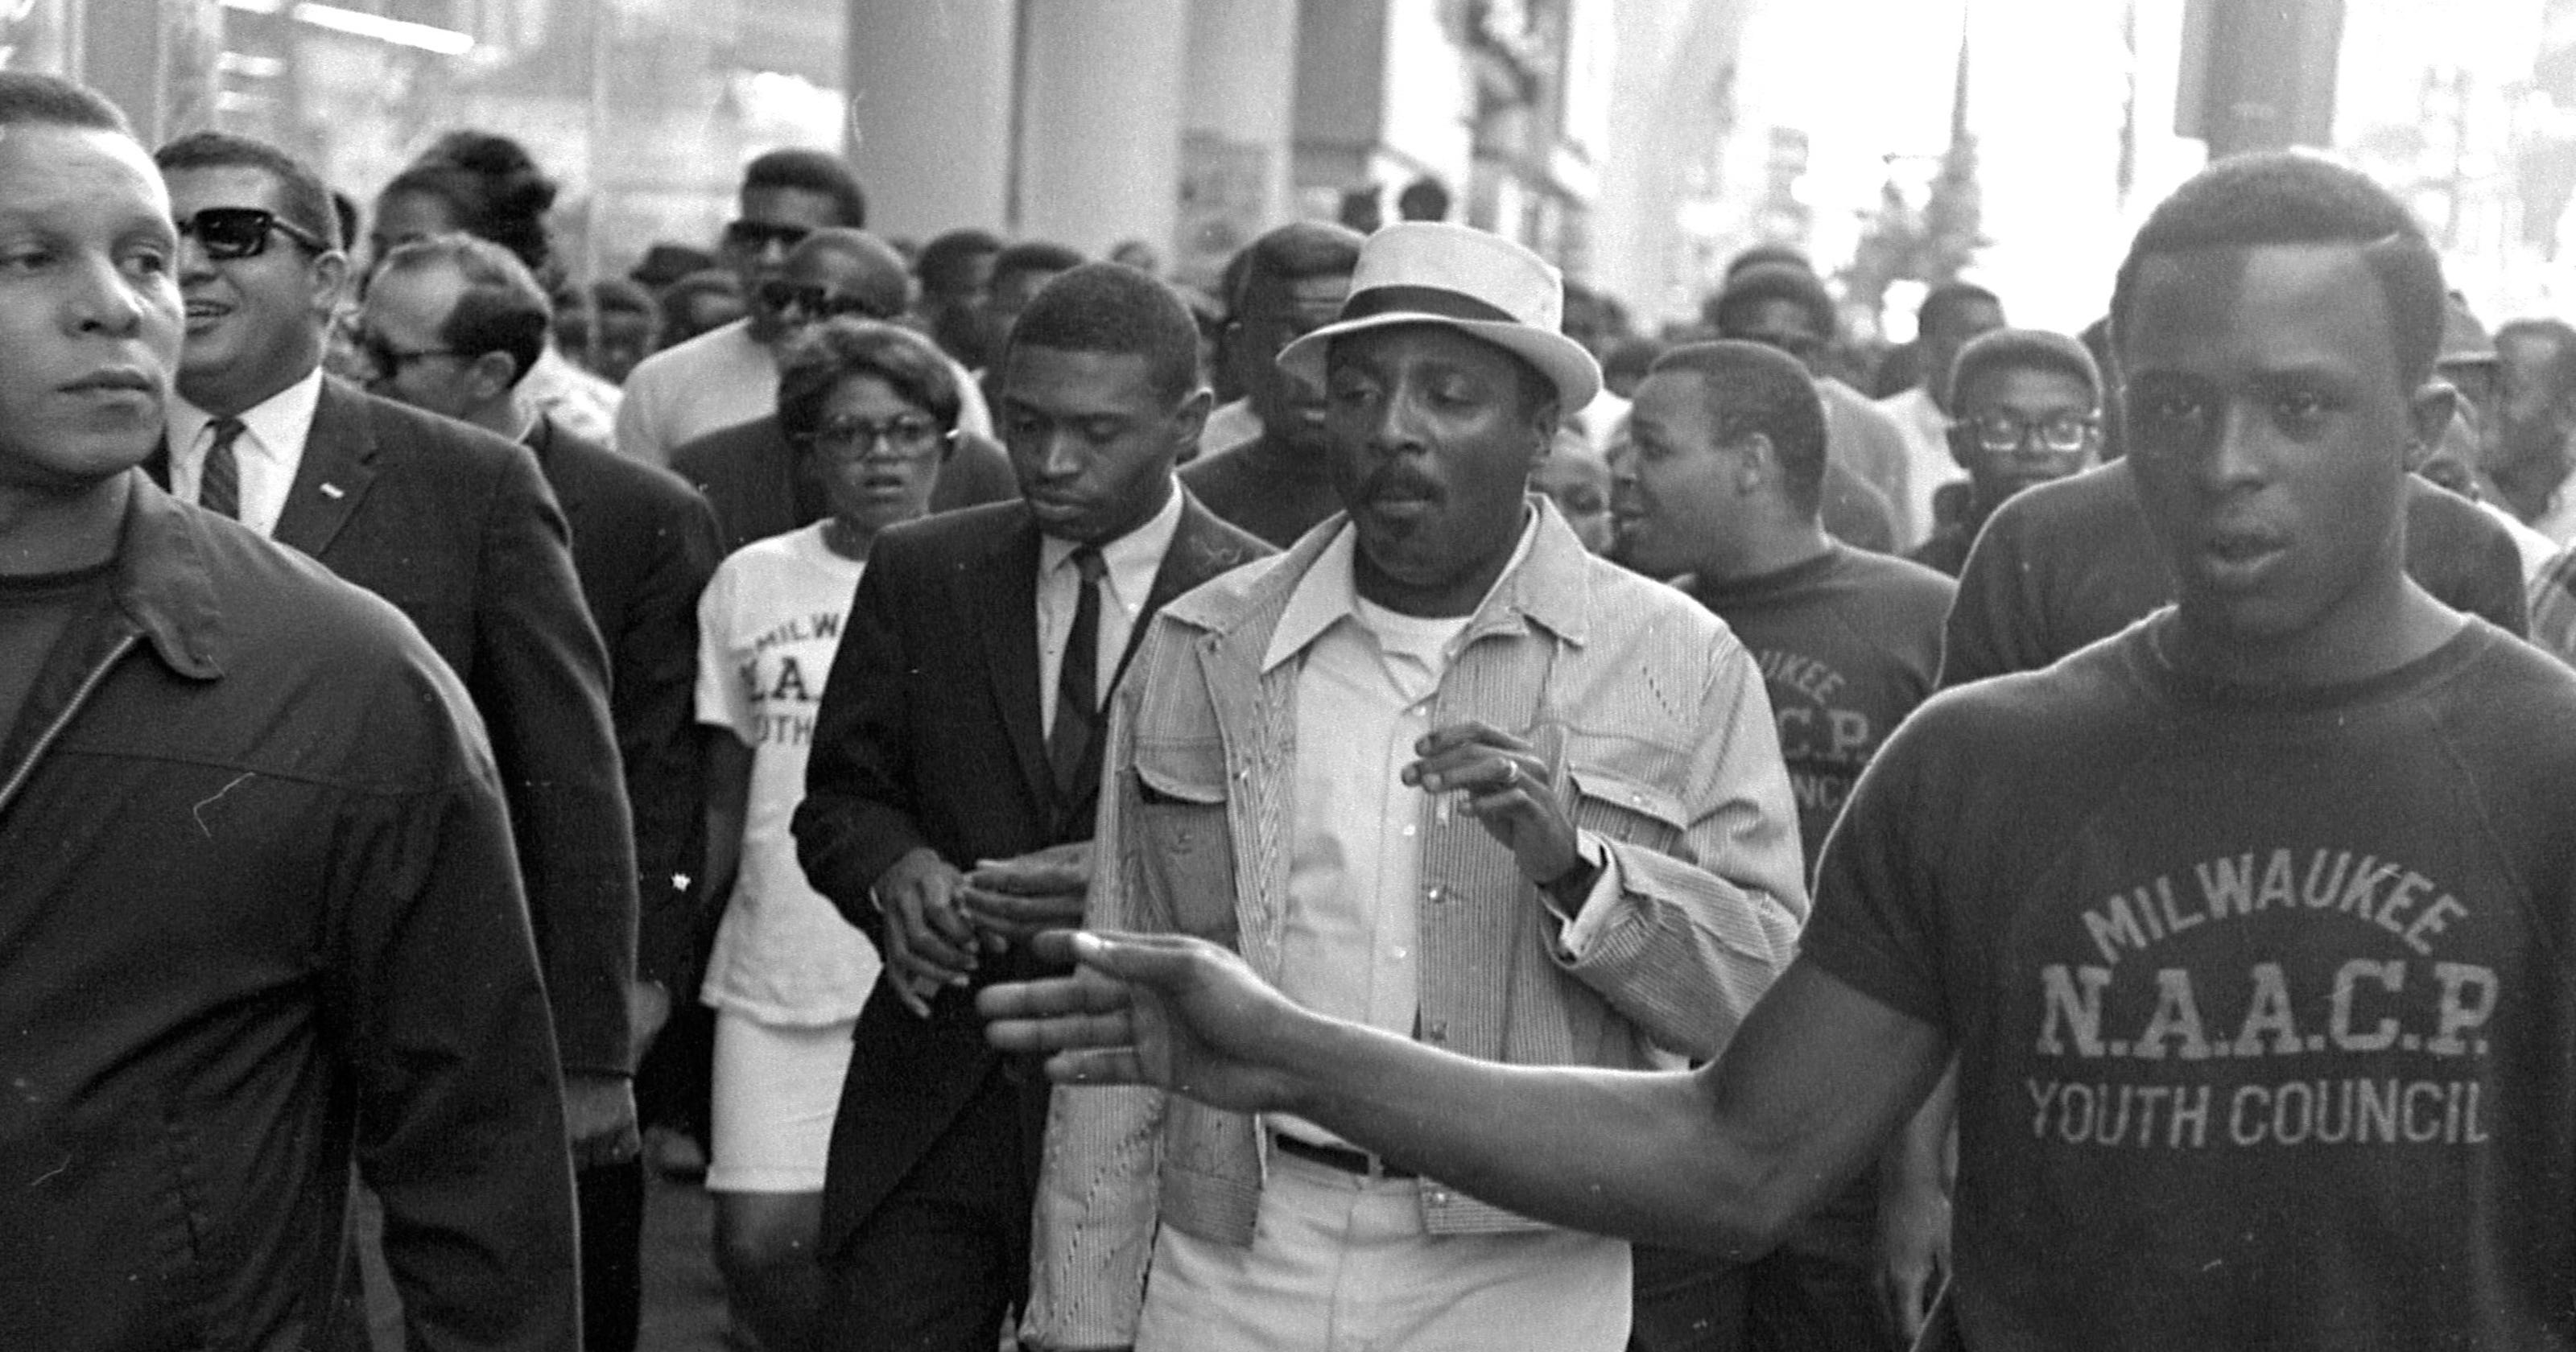 Dick Gregory helped lead Milwaukee's civil rights fights